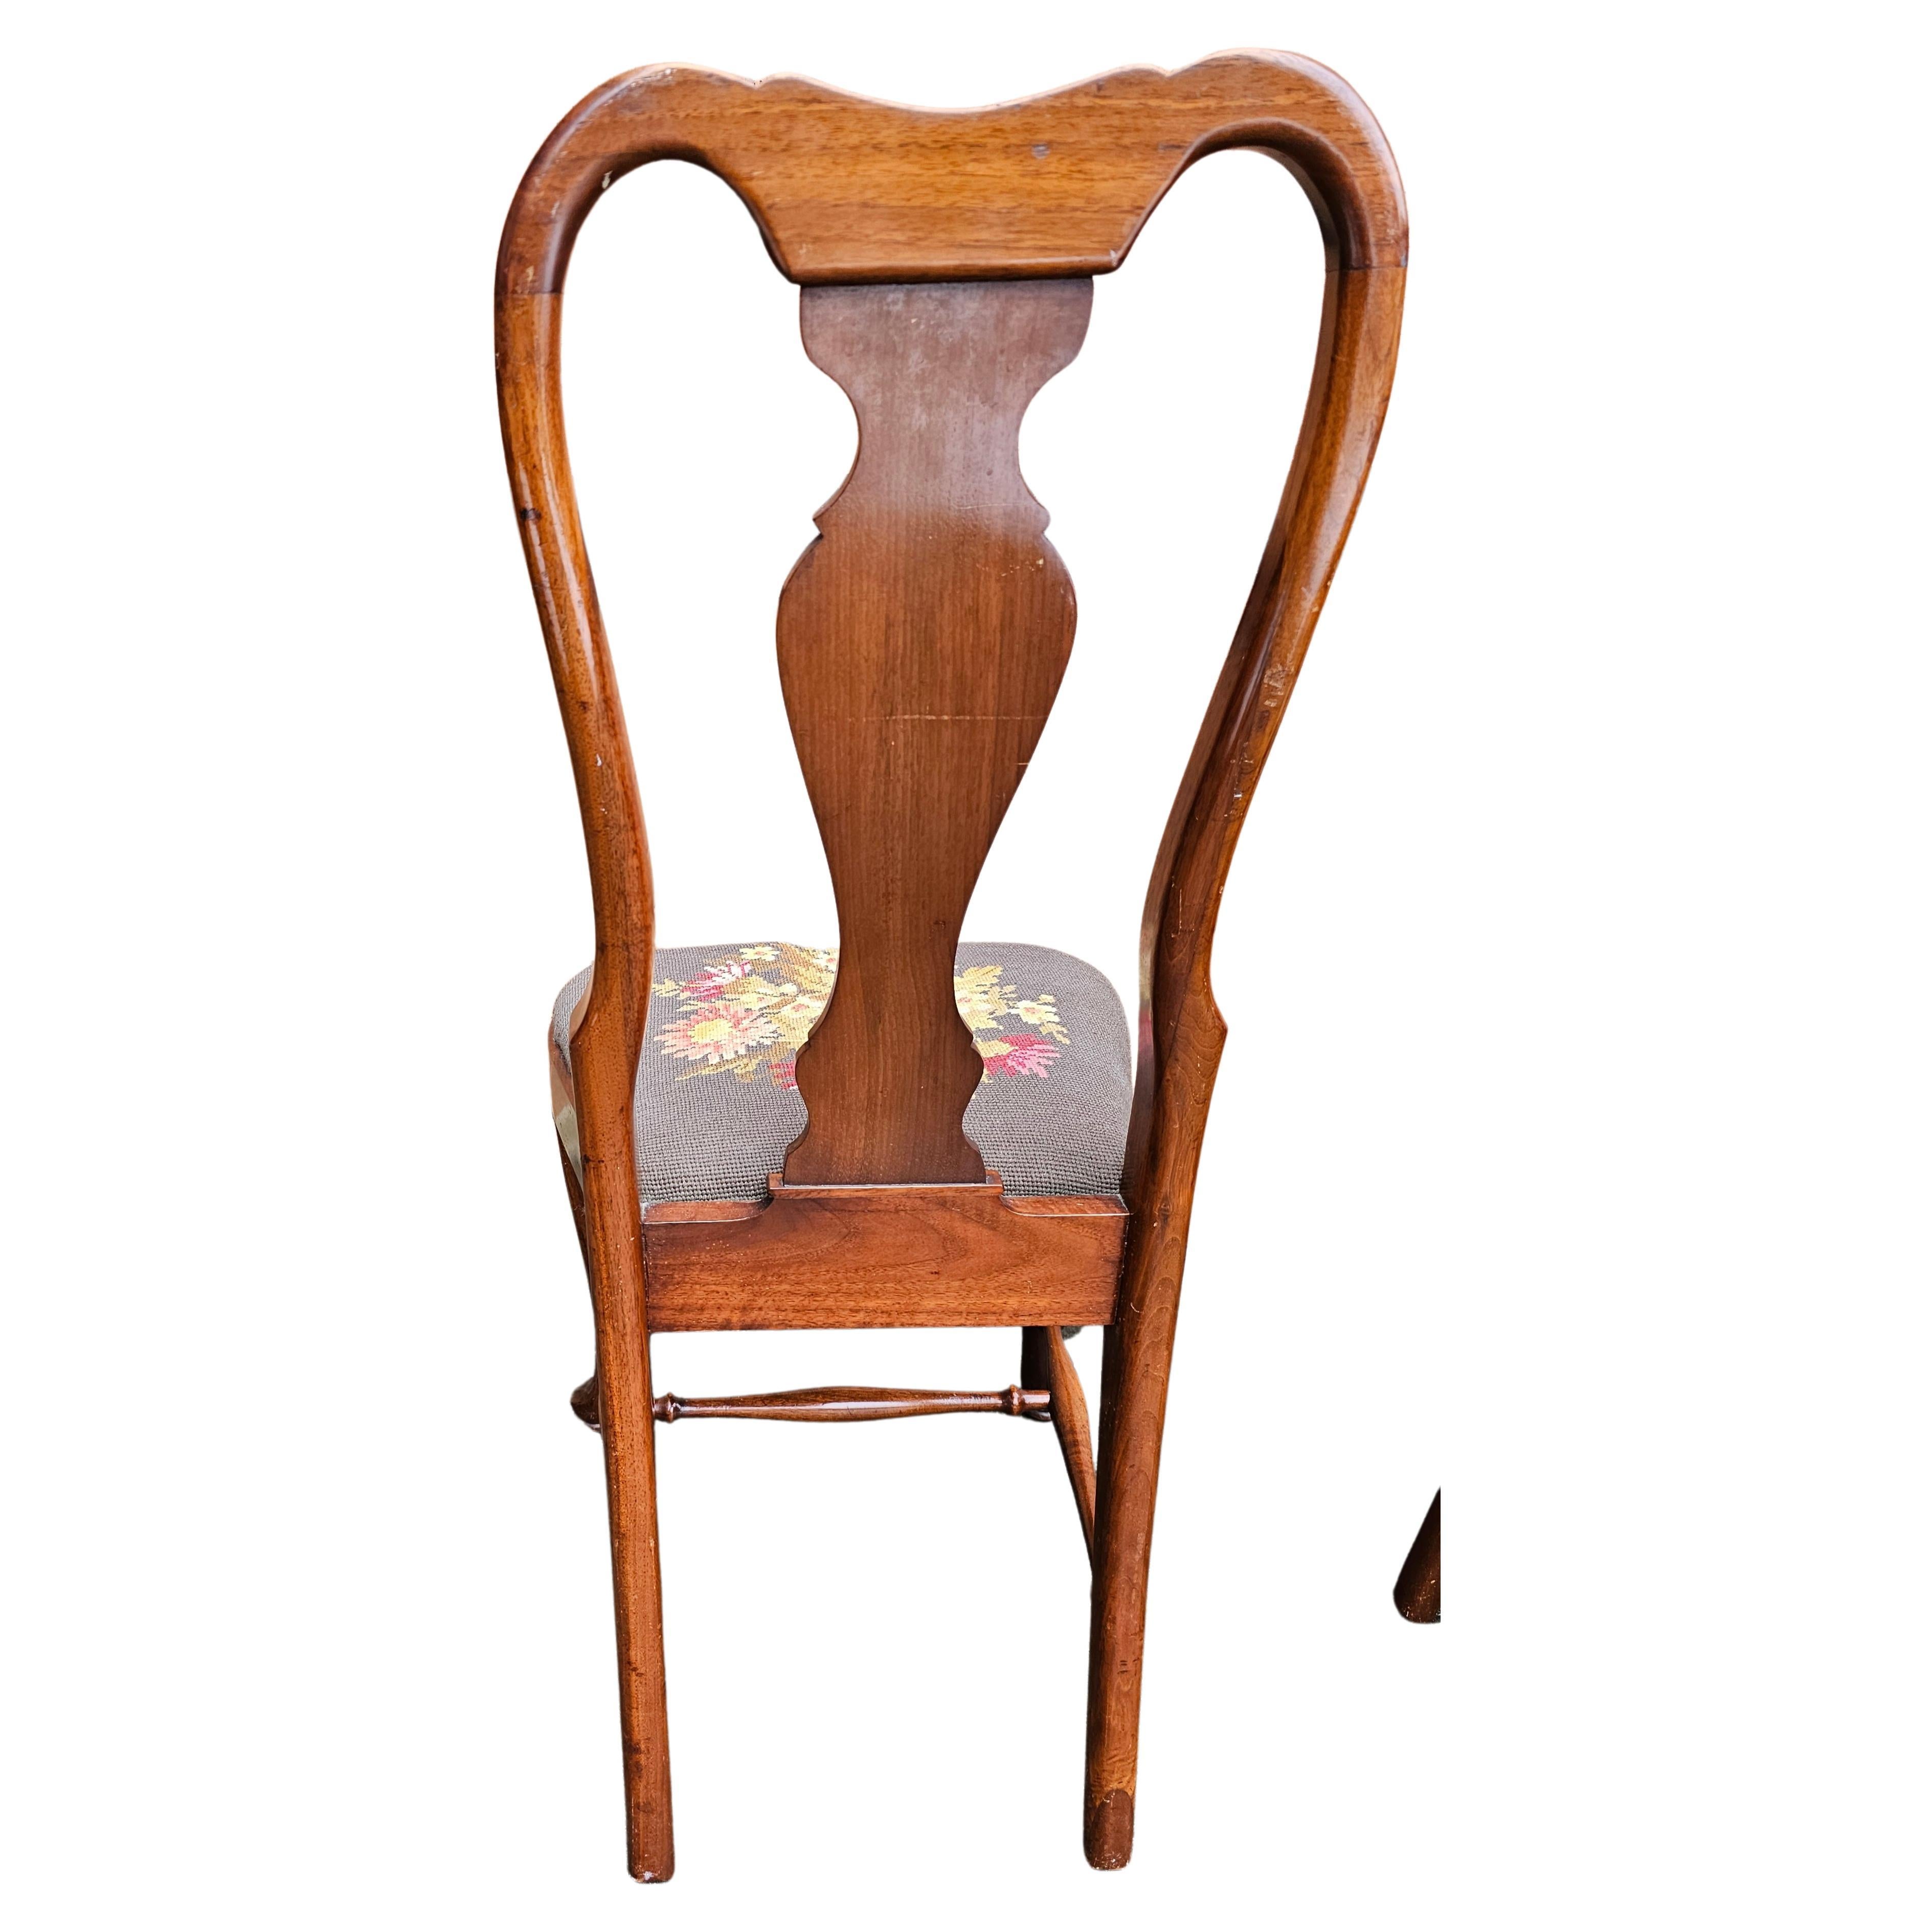 Upholstery 19th Century Grand Ledge Mahogany and Needlepoint seat Dining Chairs, Pair For Sale